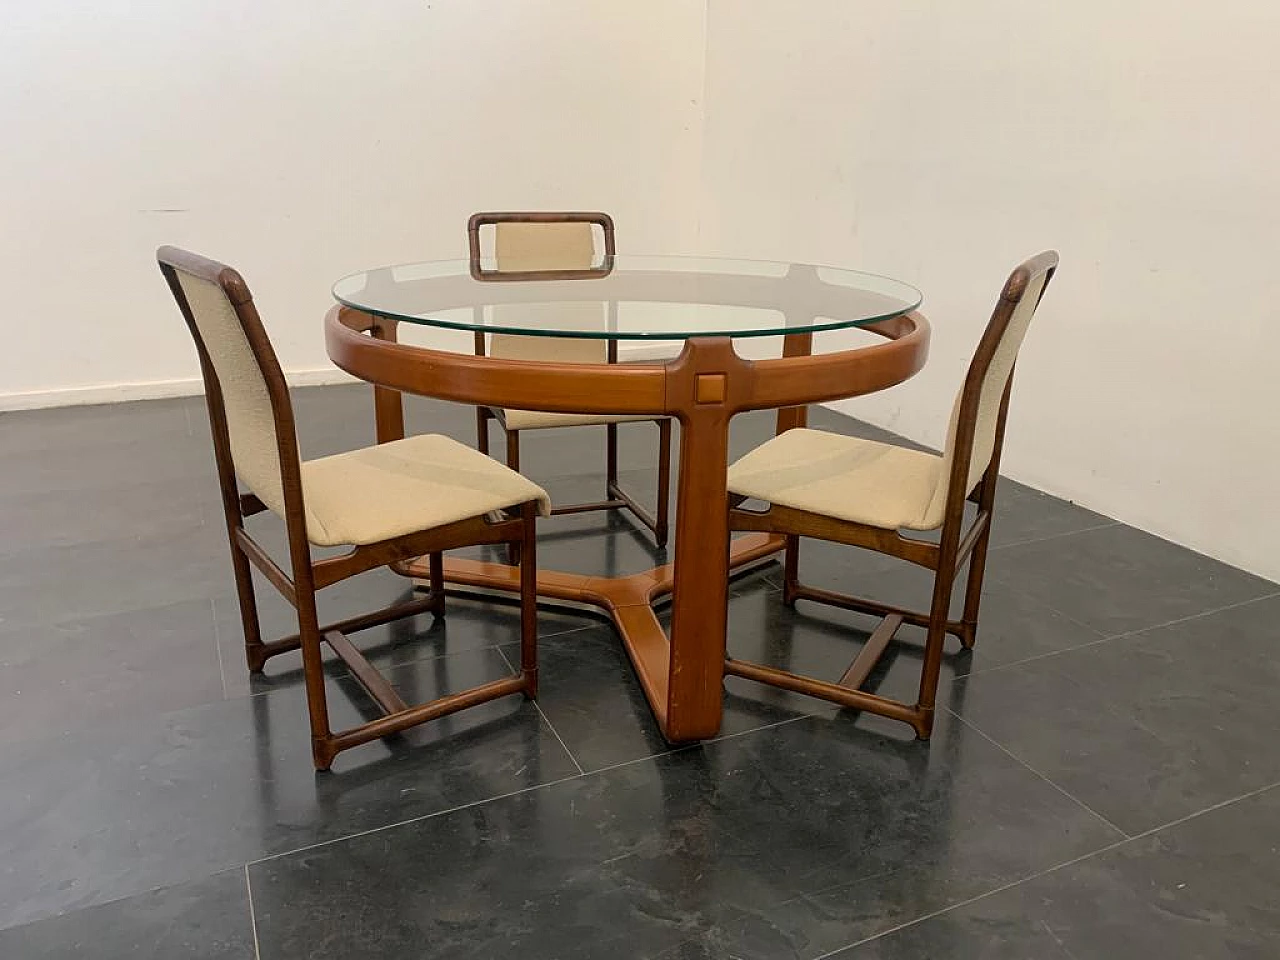 3 Chairs and round table in wood and glass, 1960s 1